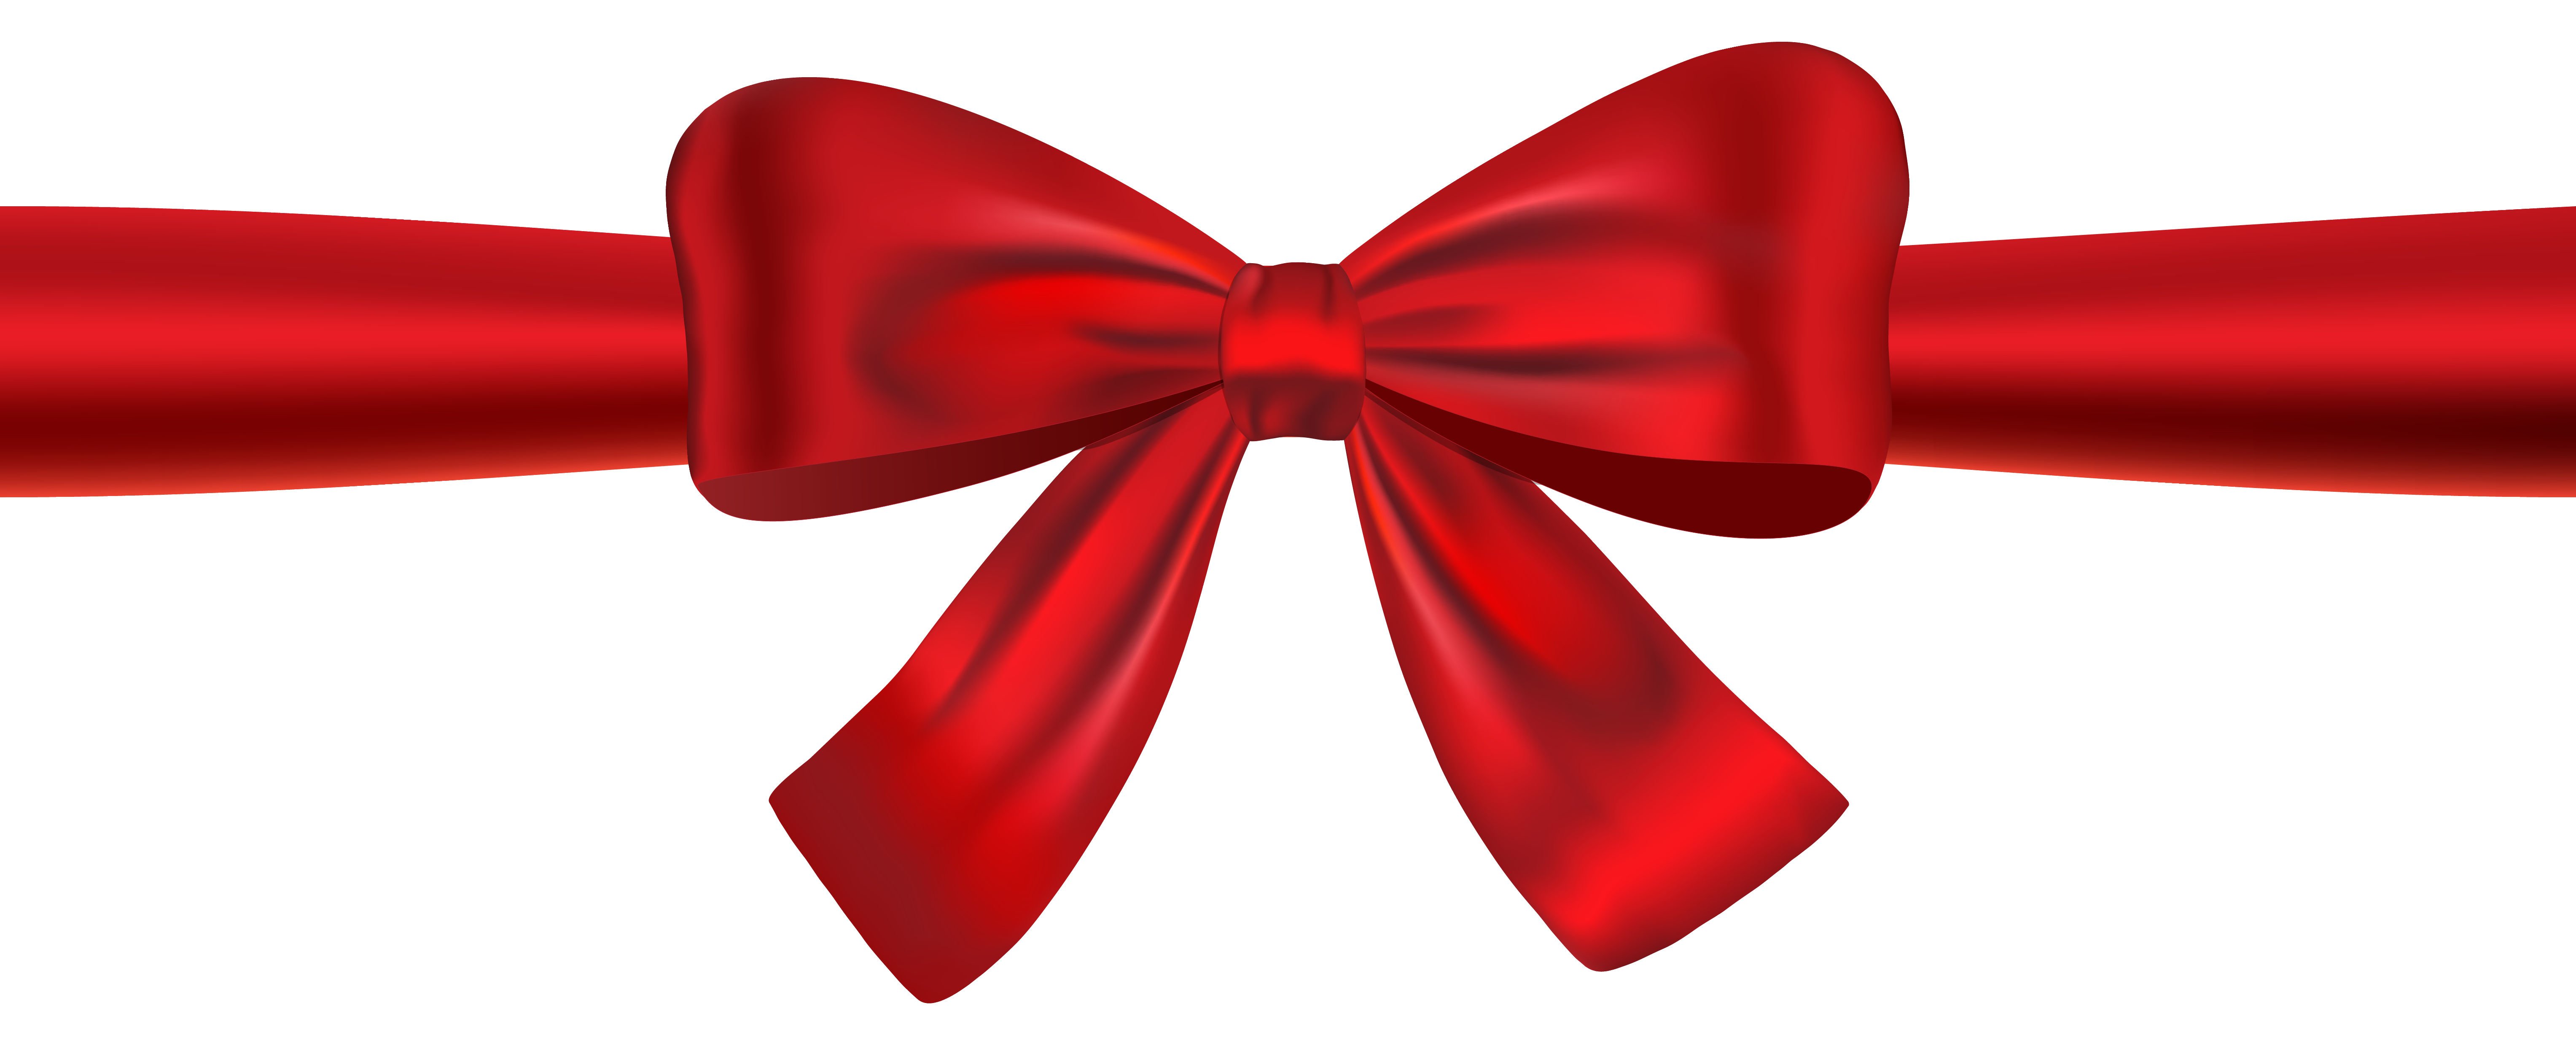 Red Bow Ribbon Icon  Bow clipart, Bows, Red bow